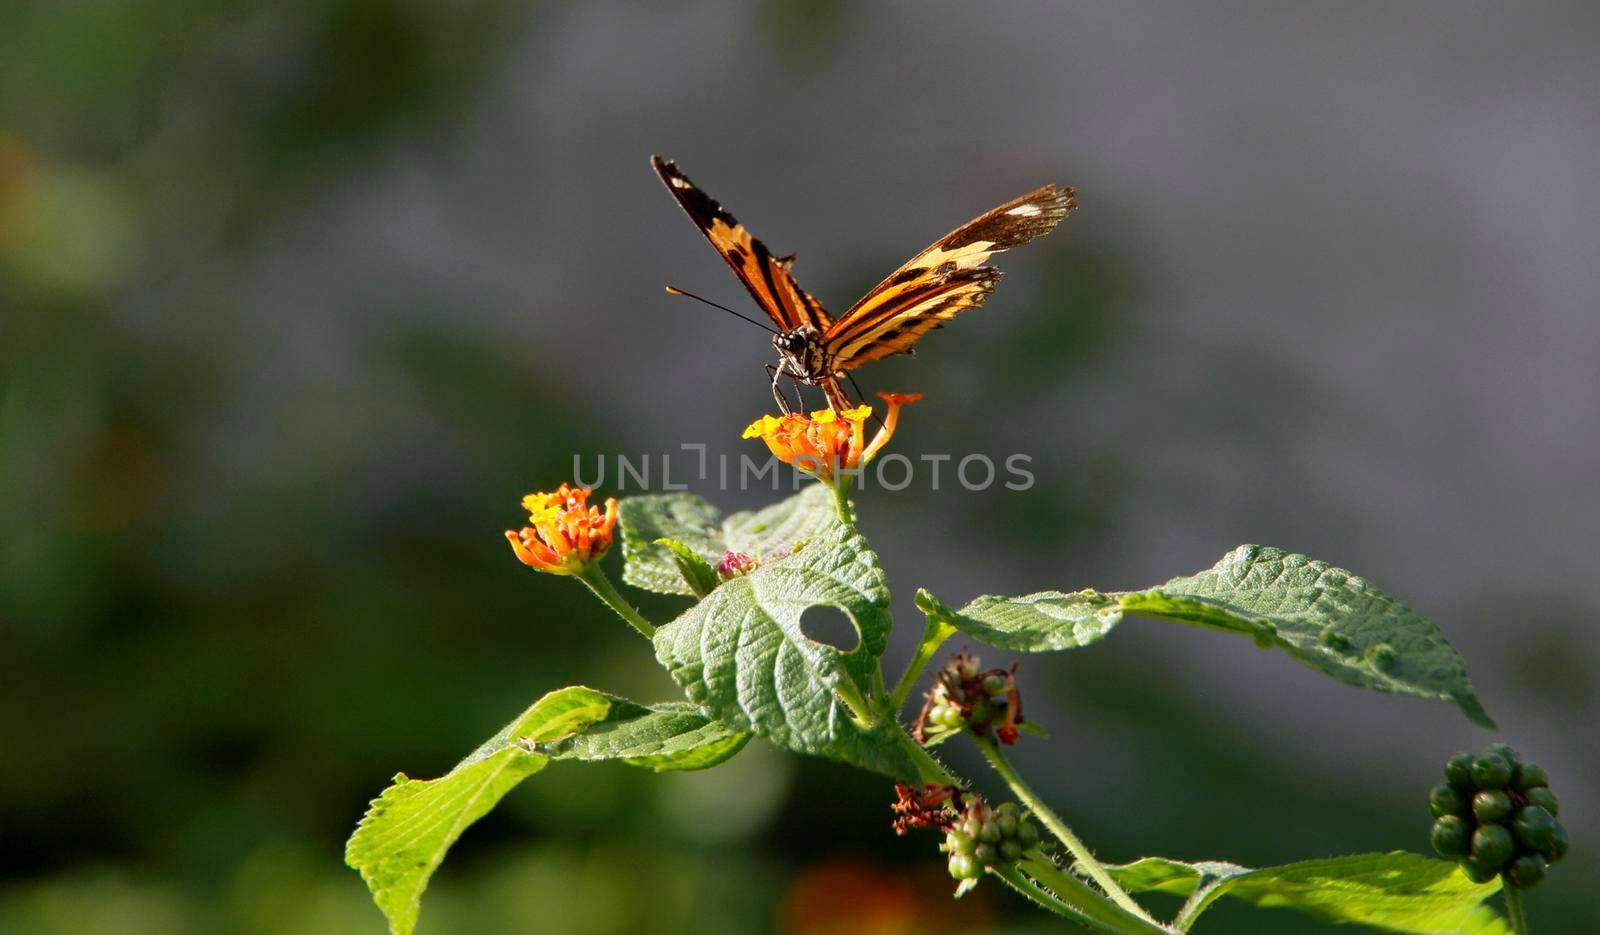 salvador, bahia / brazil - july 26, 2014: butterfly is seen in garden in the city of Salvador.